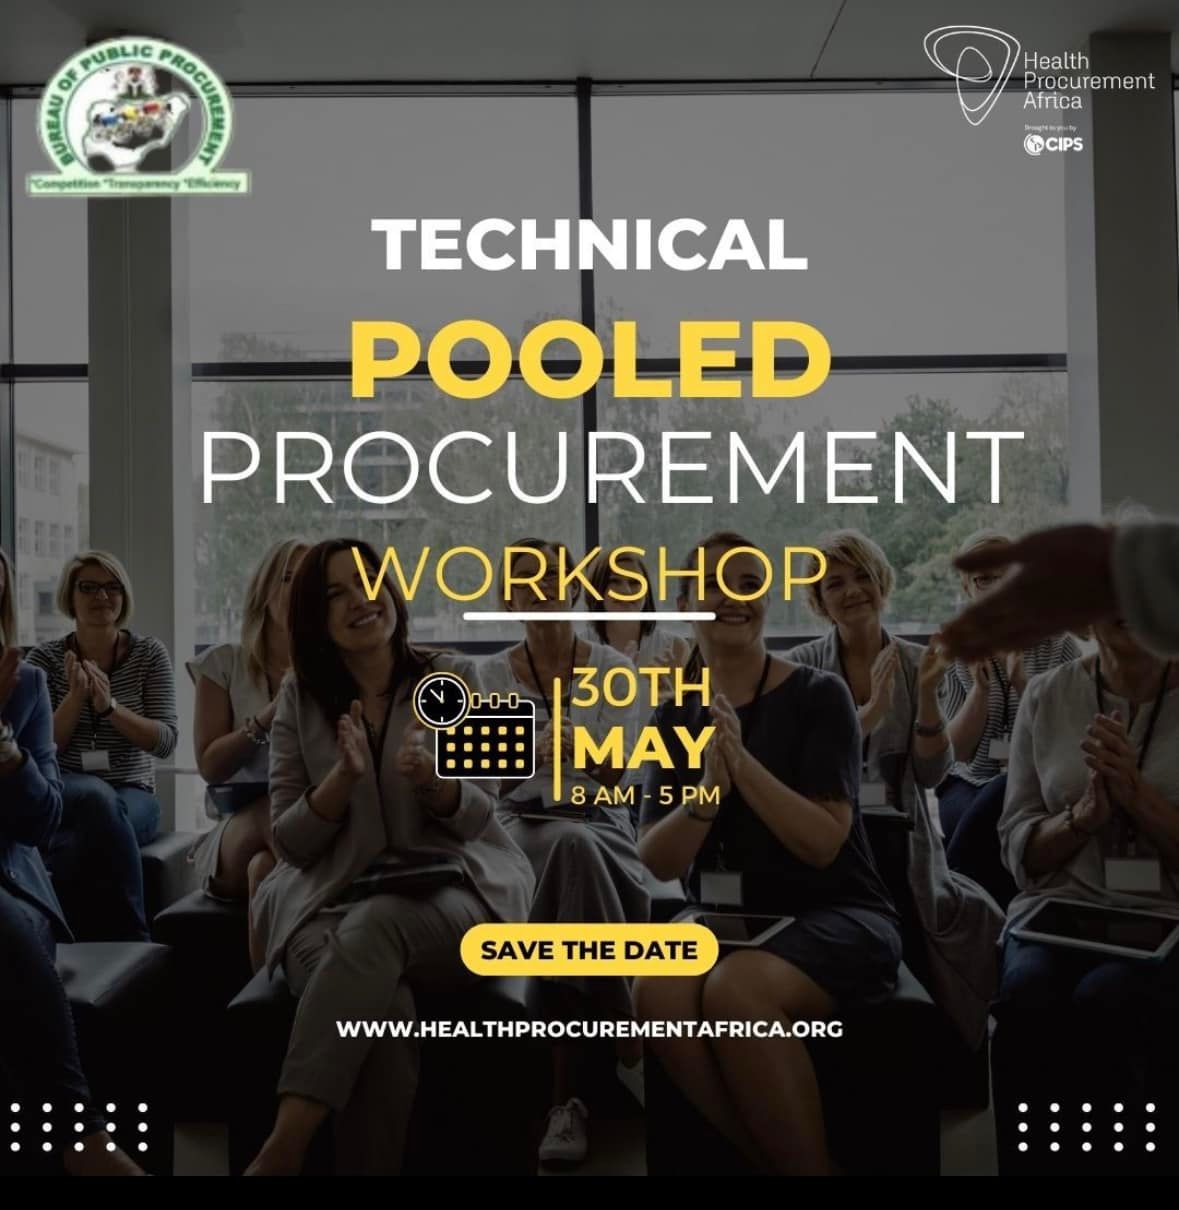 Pooled Procurement Revolution: Transforming Practices for the Better